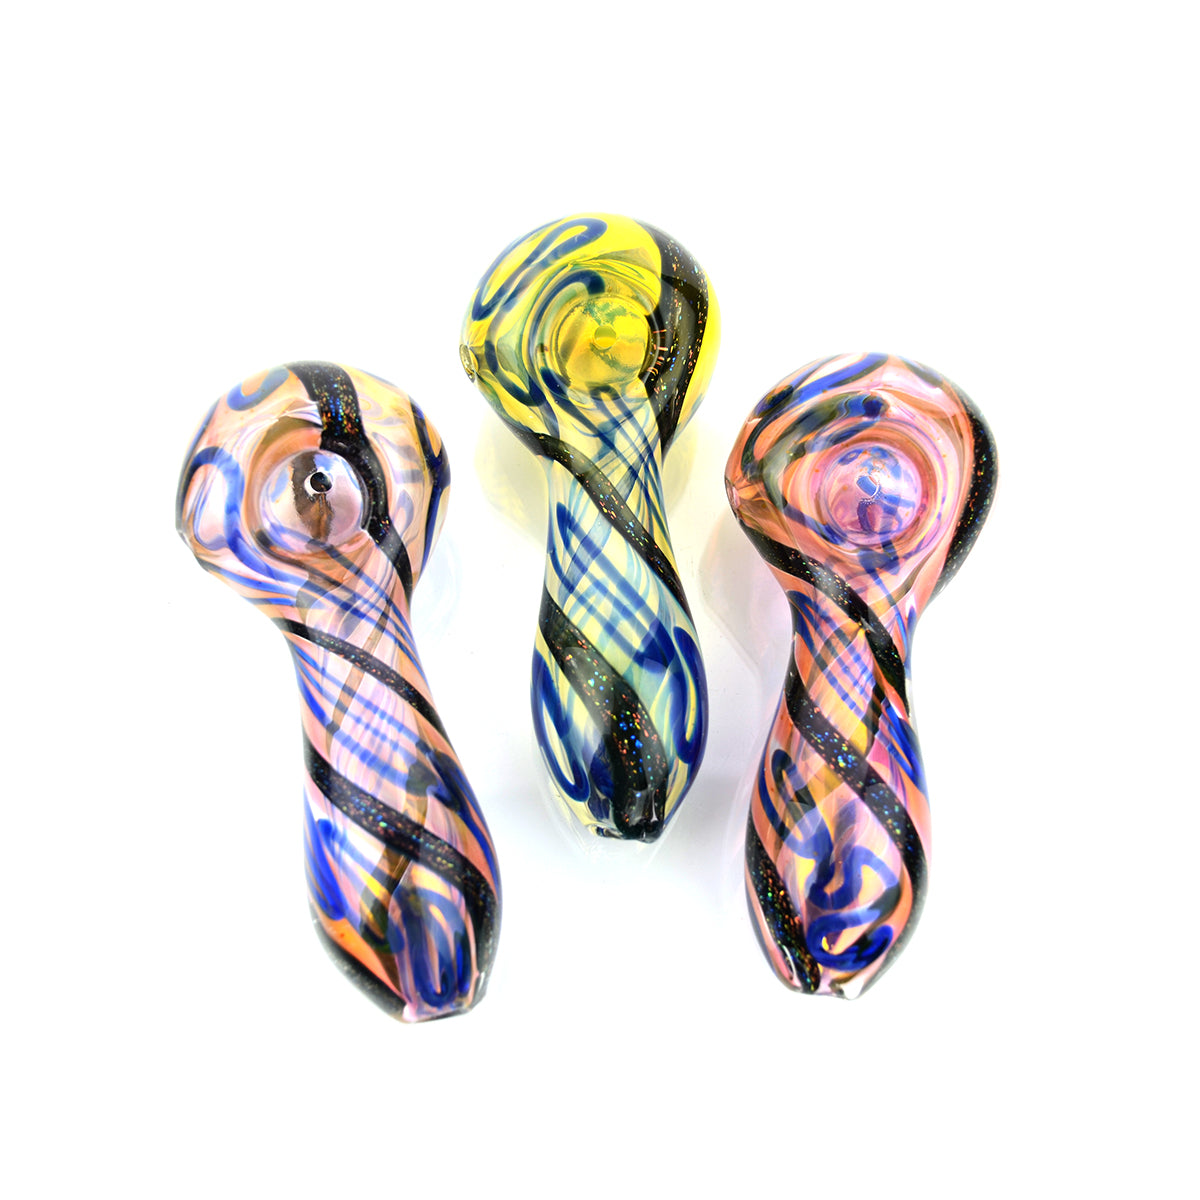 5'' American Made Swirling Dichro Art Hand Pipe Spoon GOLD Fume Glass